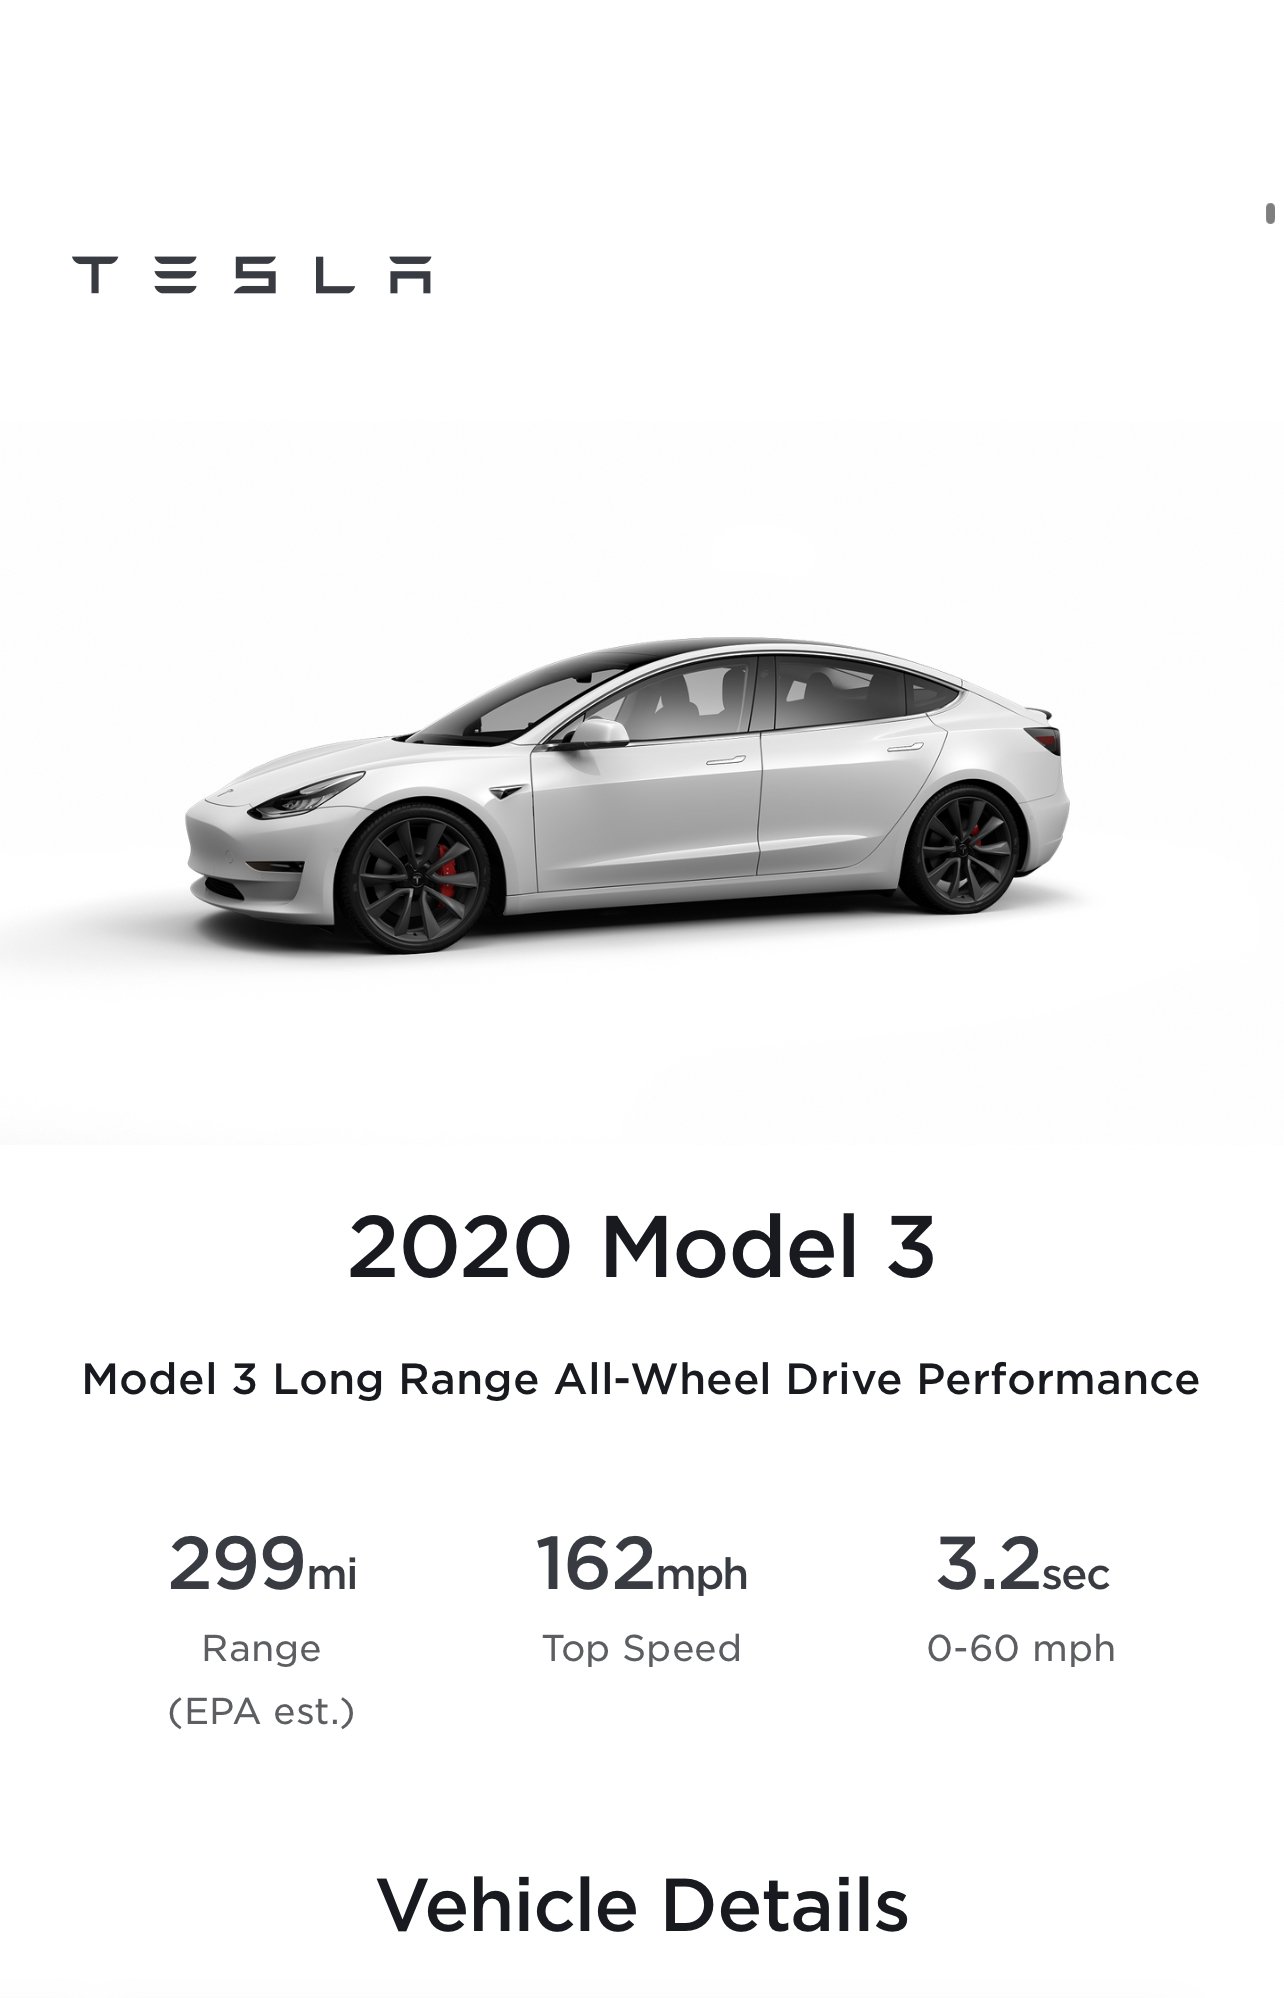 2023 Must Have Accessories for New Model Y Owners! #tesla #2023 